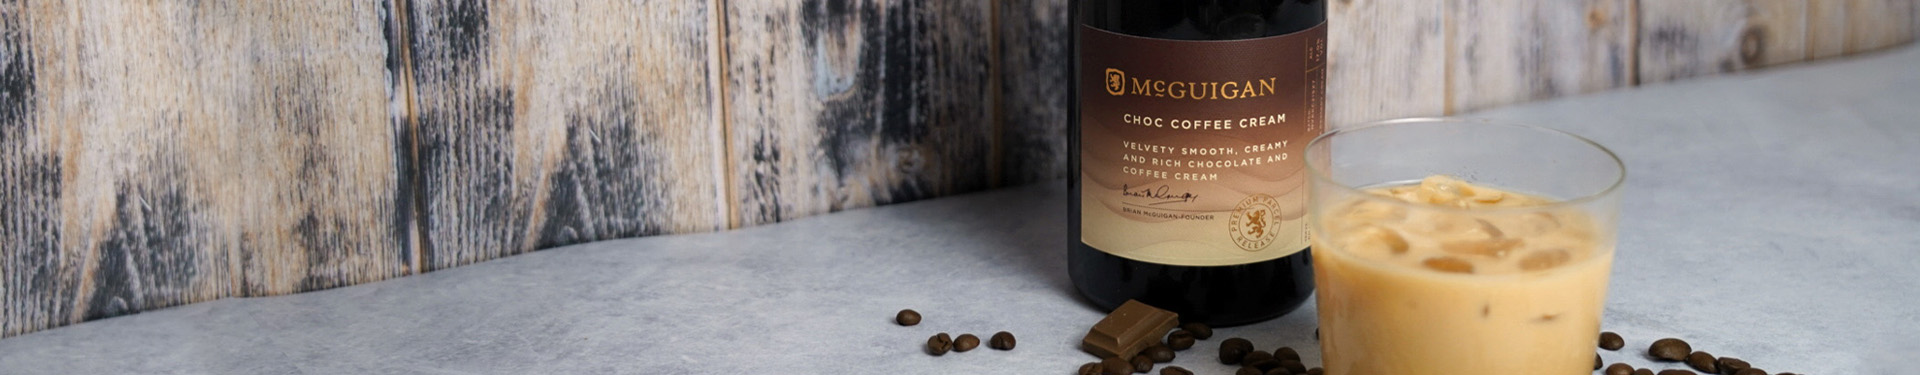 A bottle of McGuigan Choc Coffee Cream on a table with chocolate and coffee beans around it.